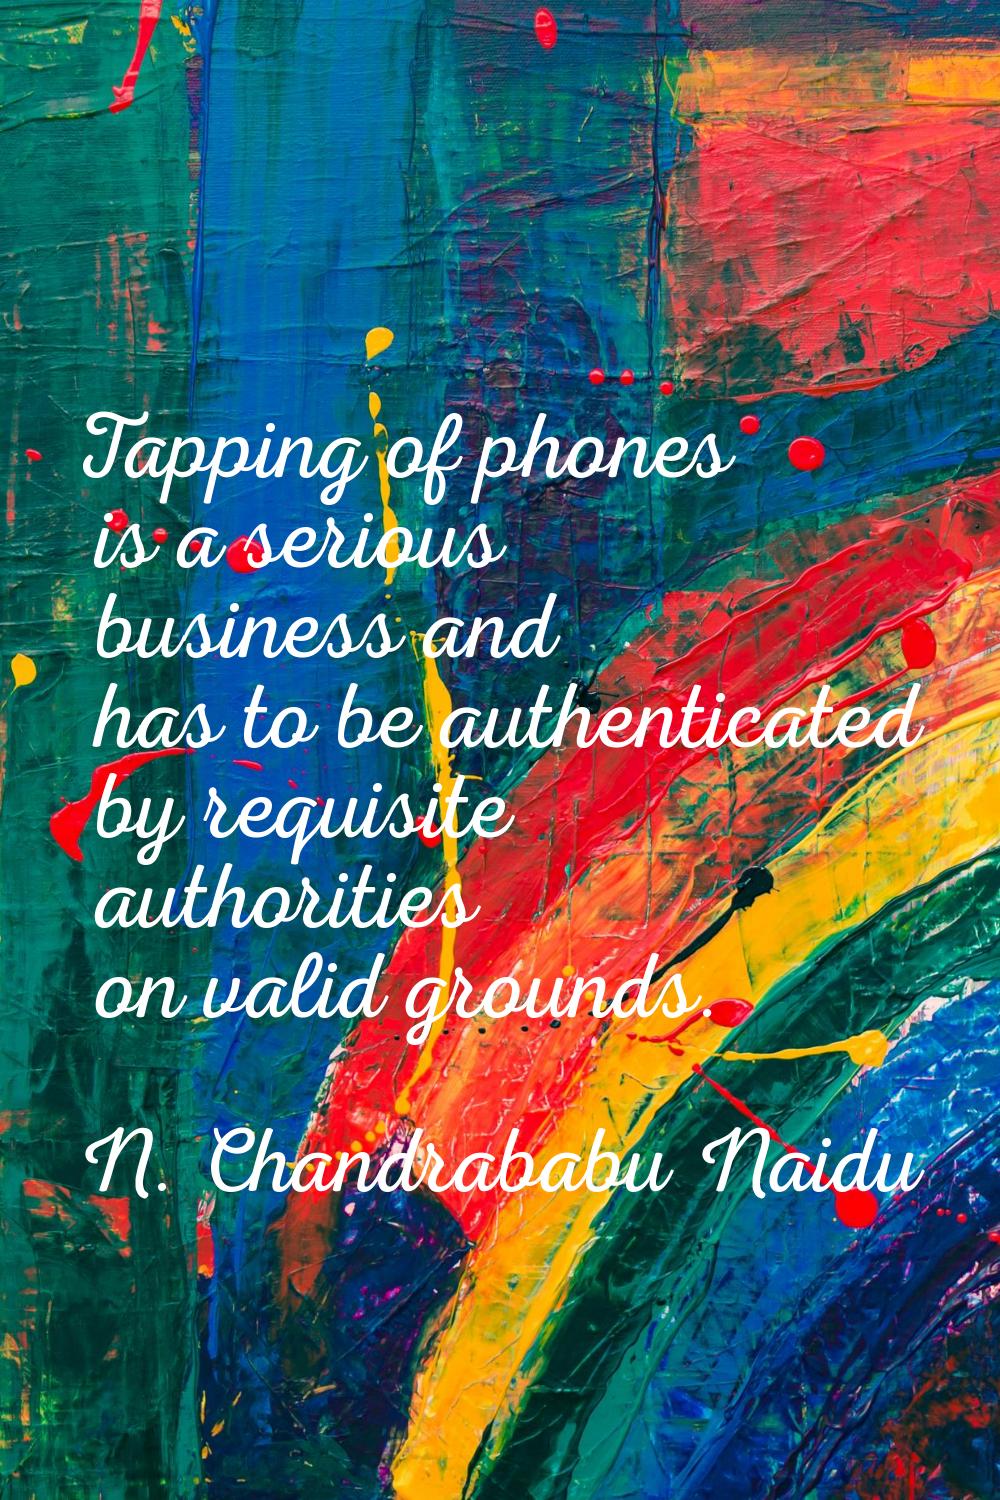 Tapping of phones is a serious business and has to be authenticated by requisite authorities on val